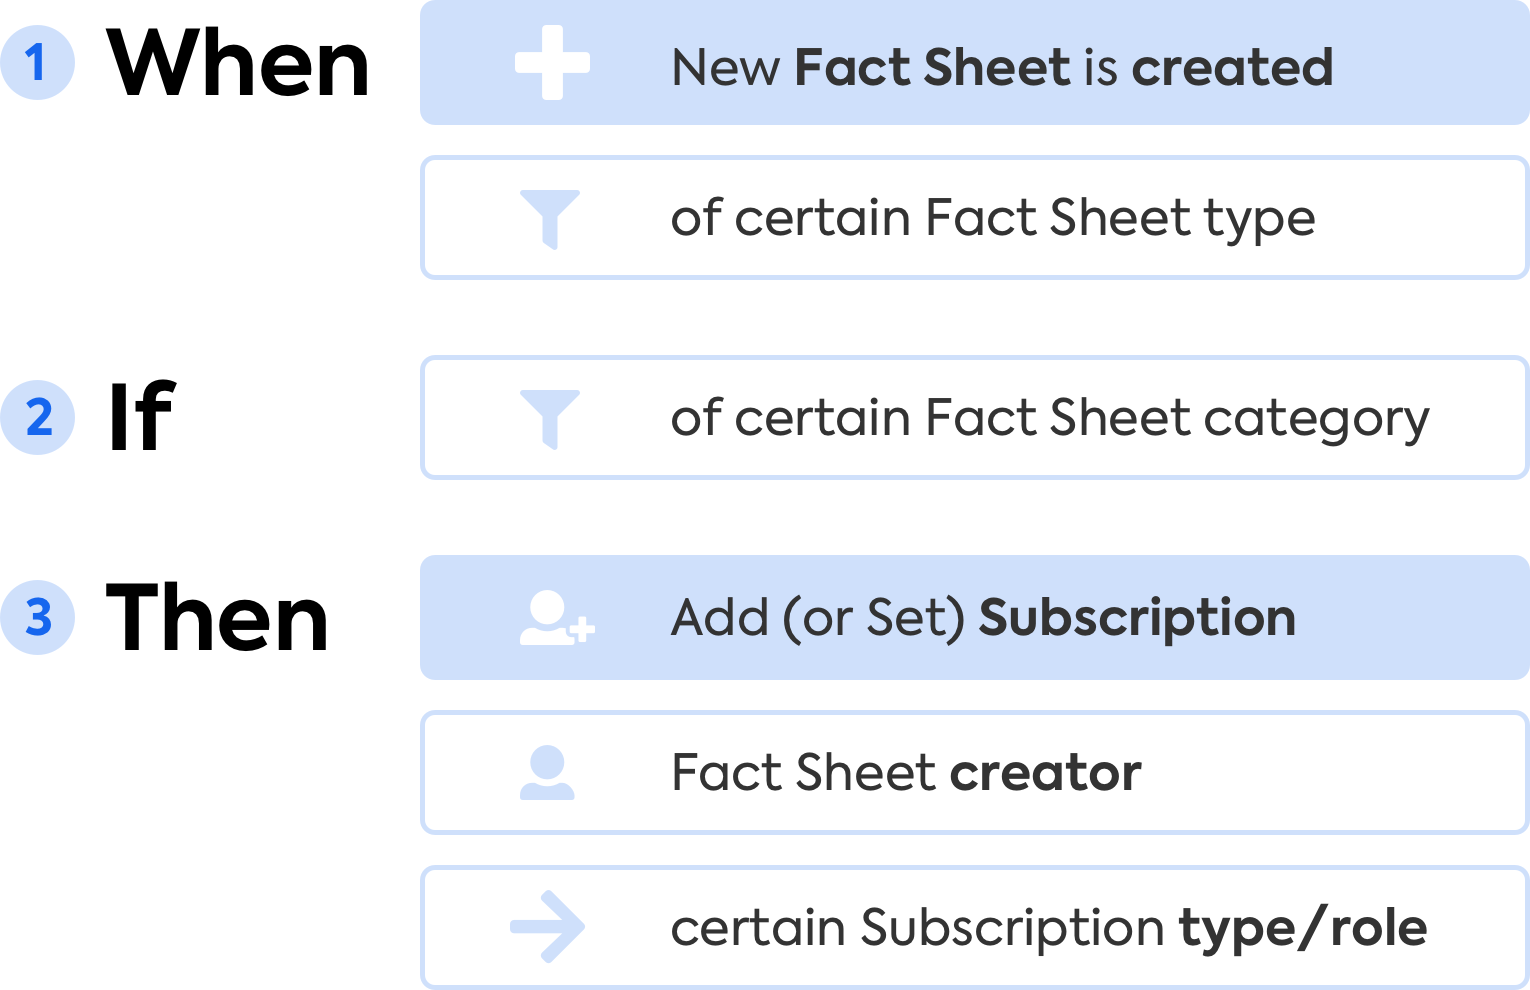 Automation: Creating Subscriptions for Fact Sheet Creators on Newly Created Fact Sheets